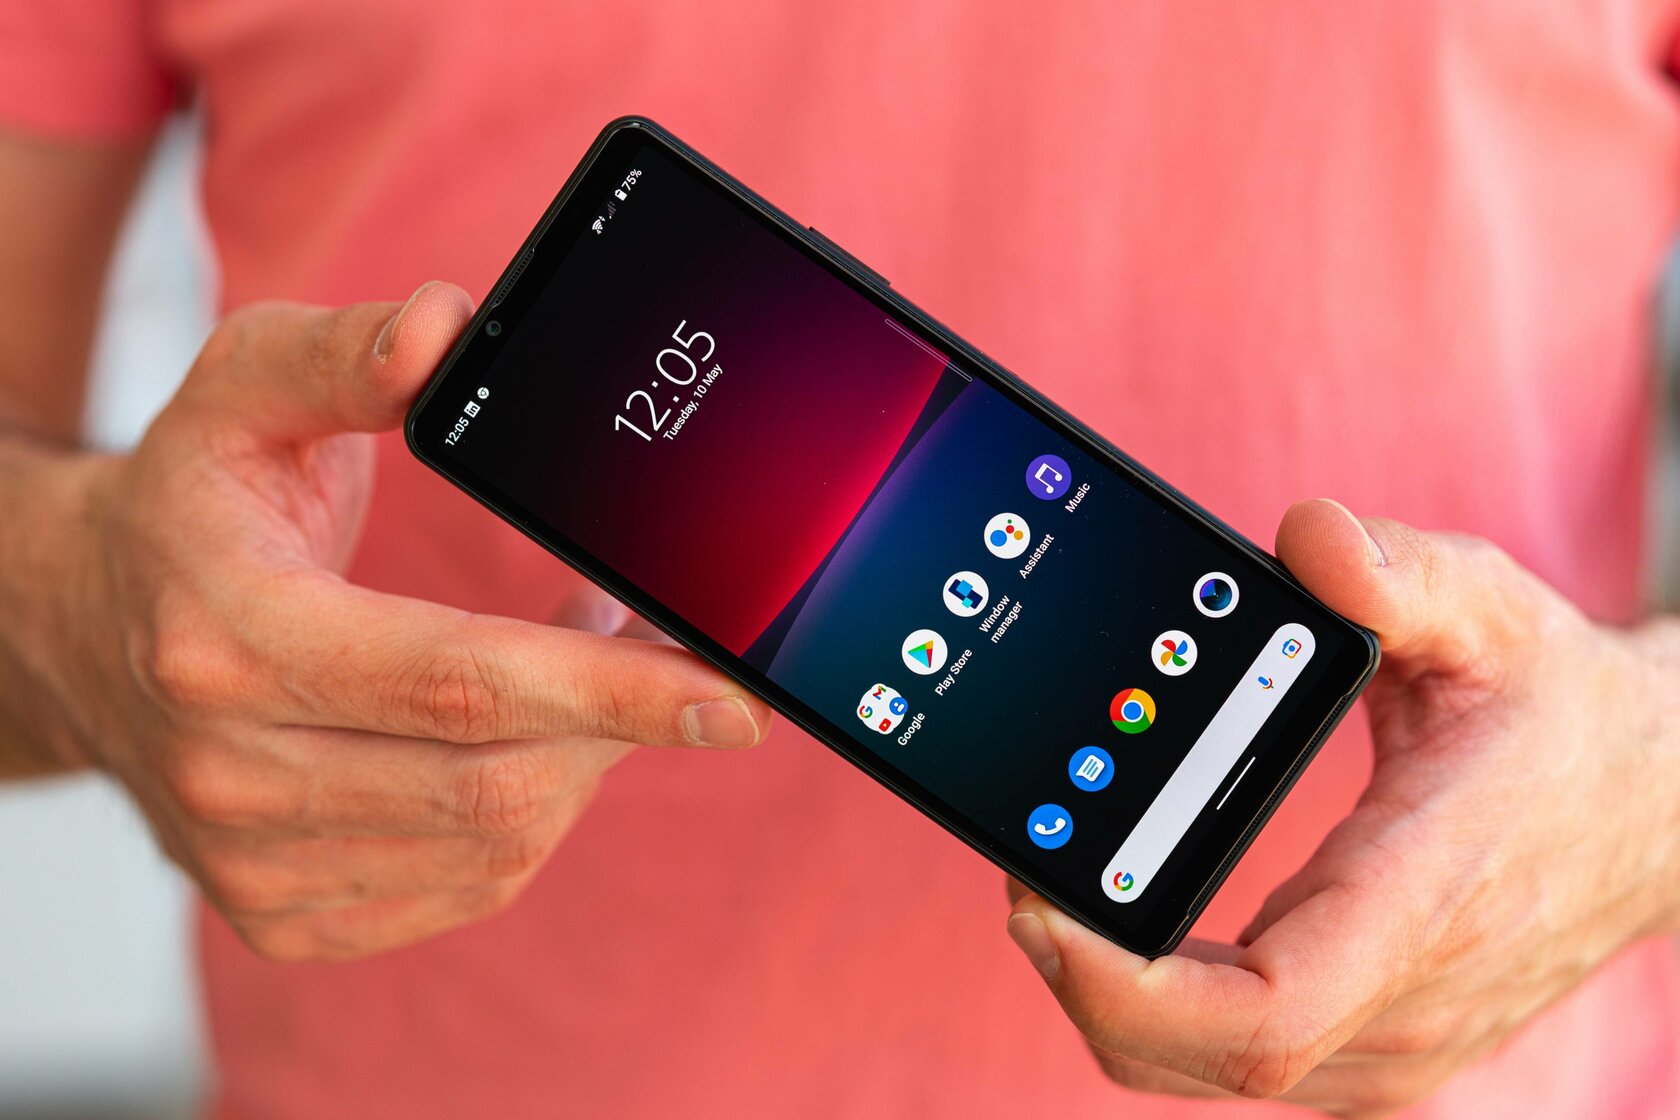 Xperia 10 5. Sony Xperia 10. Sony Xperia 10 IV 5g. Sony Xperia 10 IV Review. Sony Xperia 1 IV.